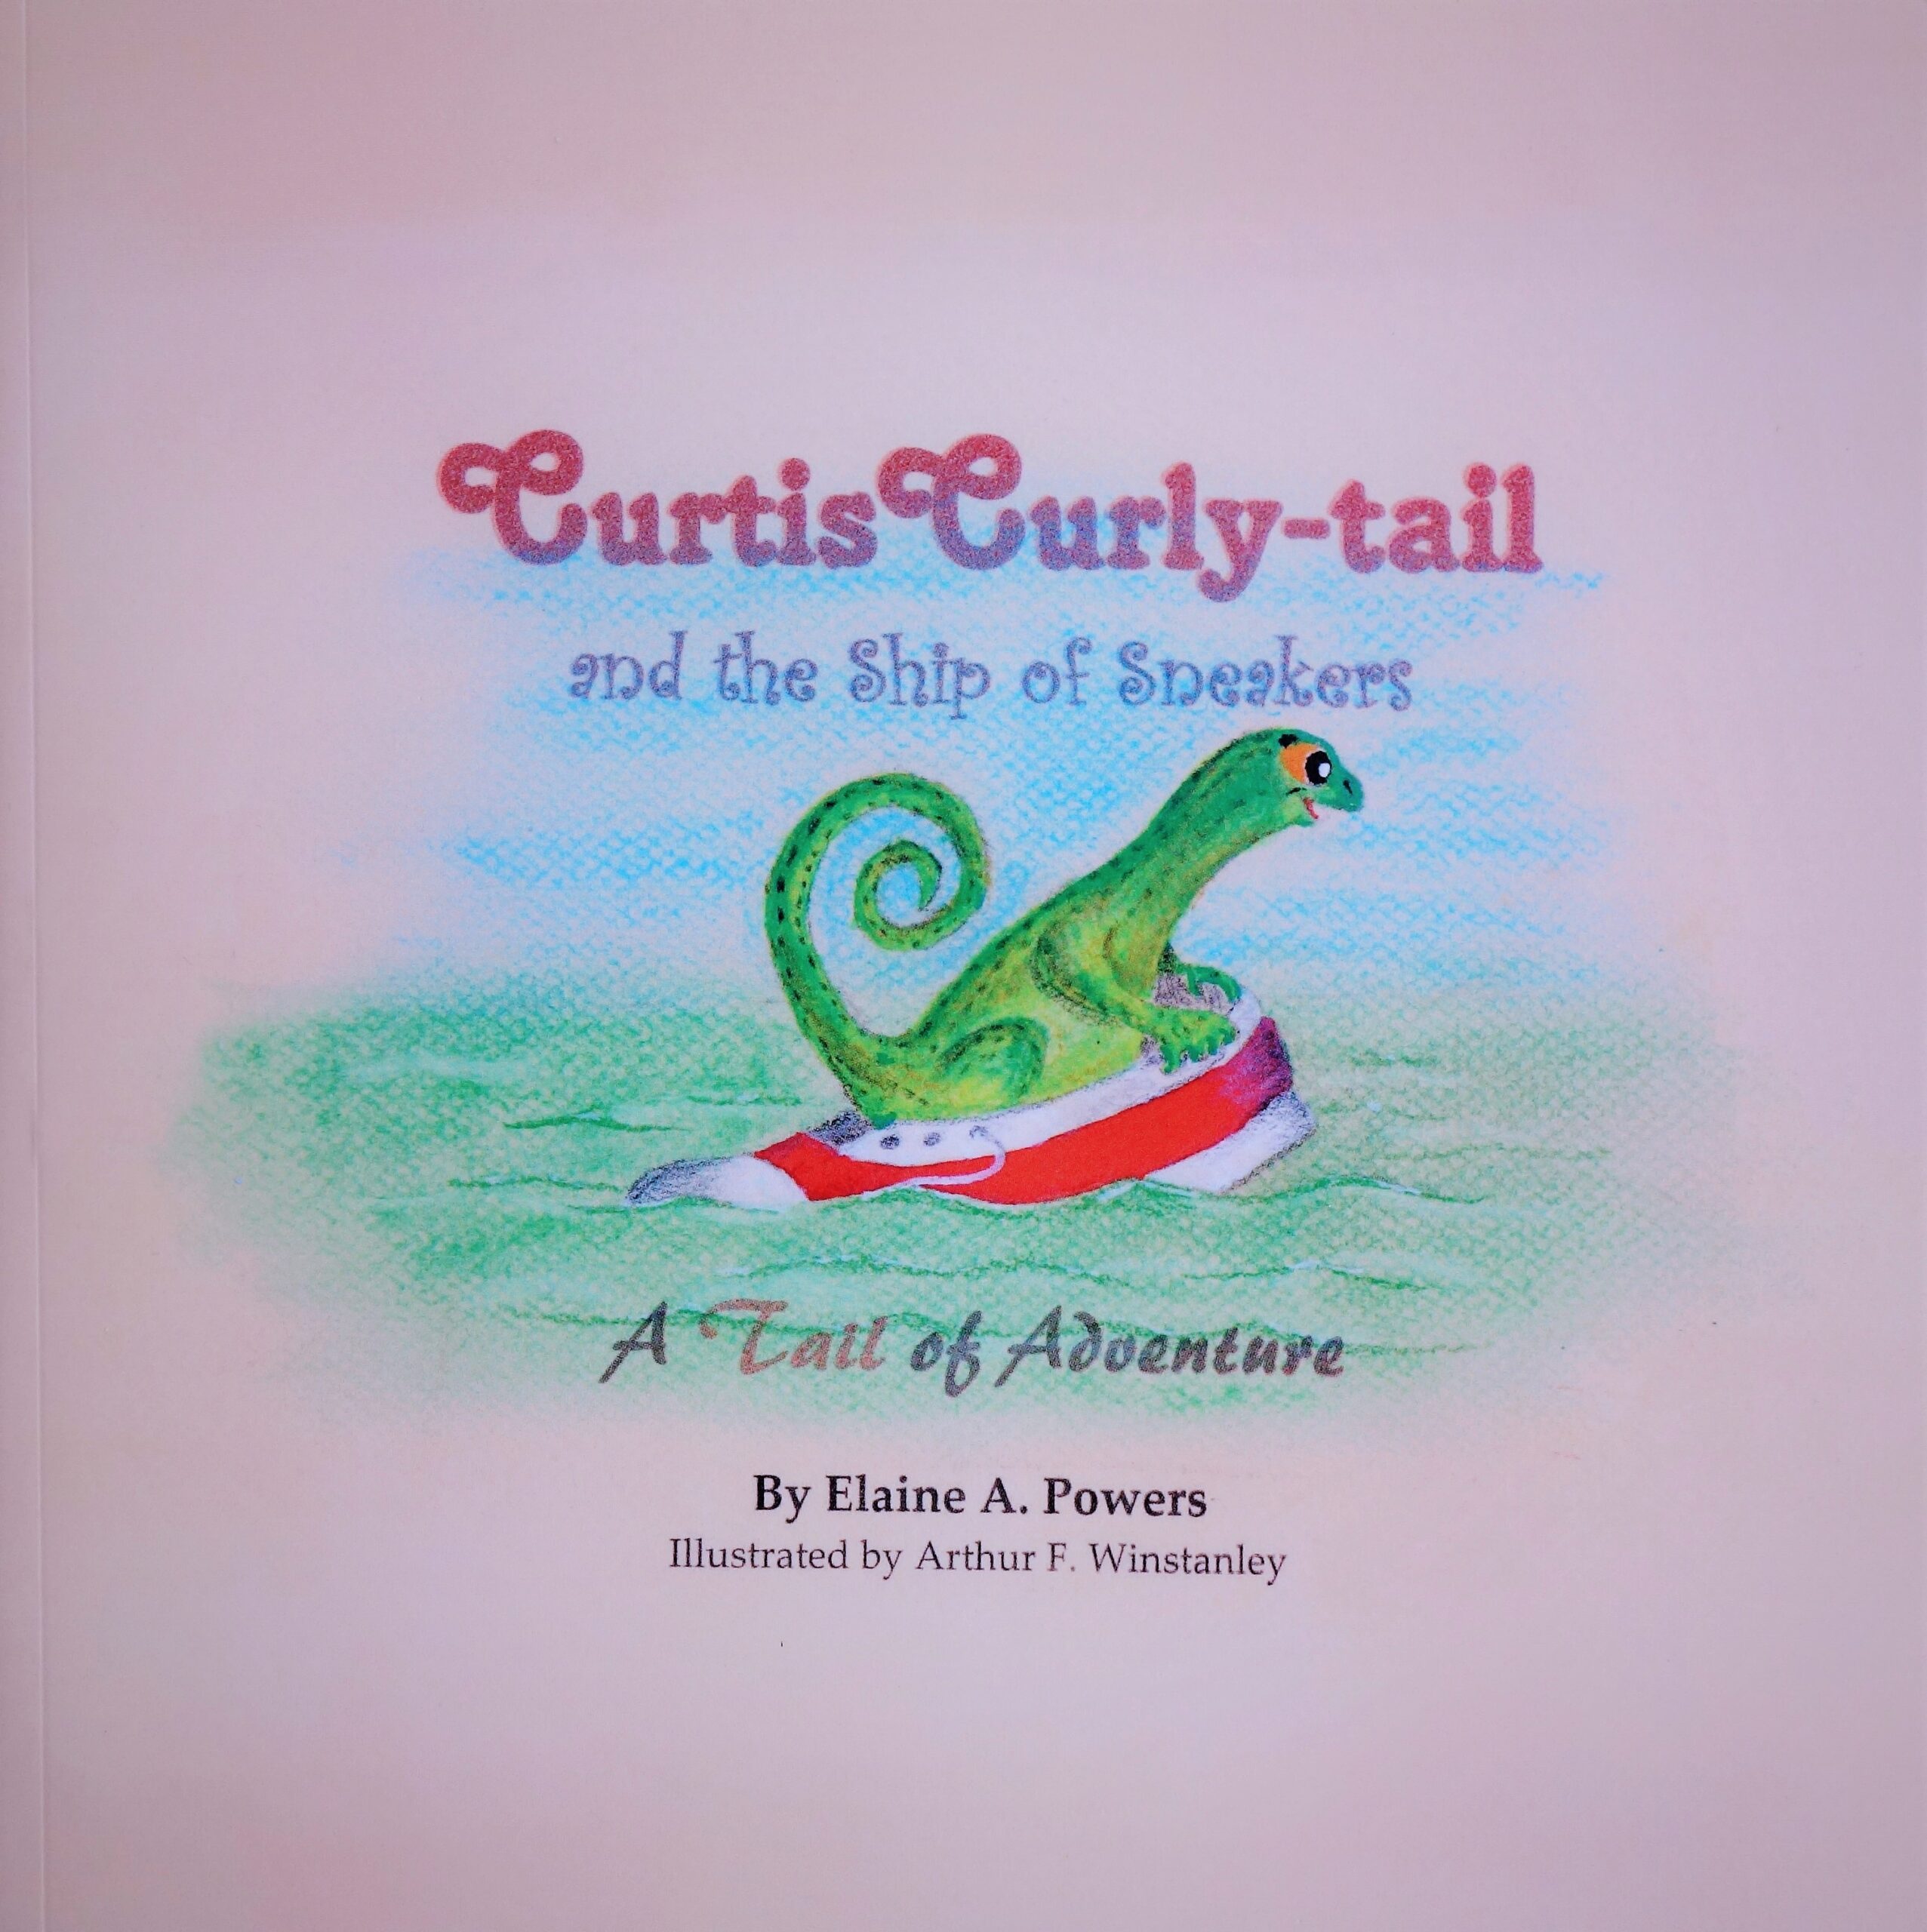 A book cover with a Curly-tail lizard riding the waves in a red sneaker